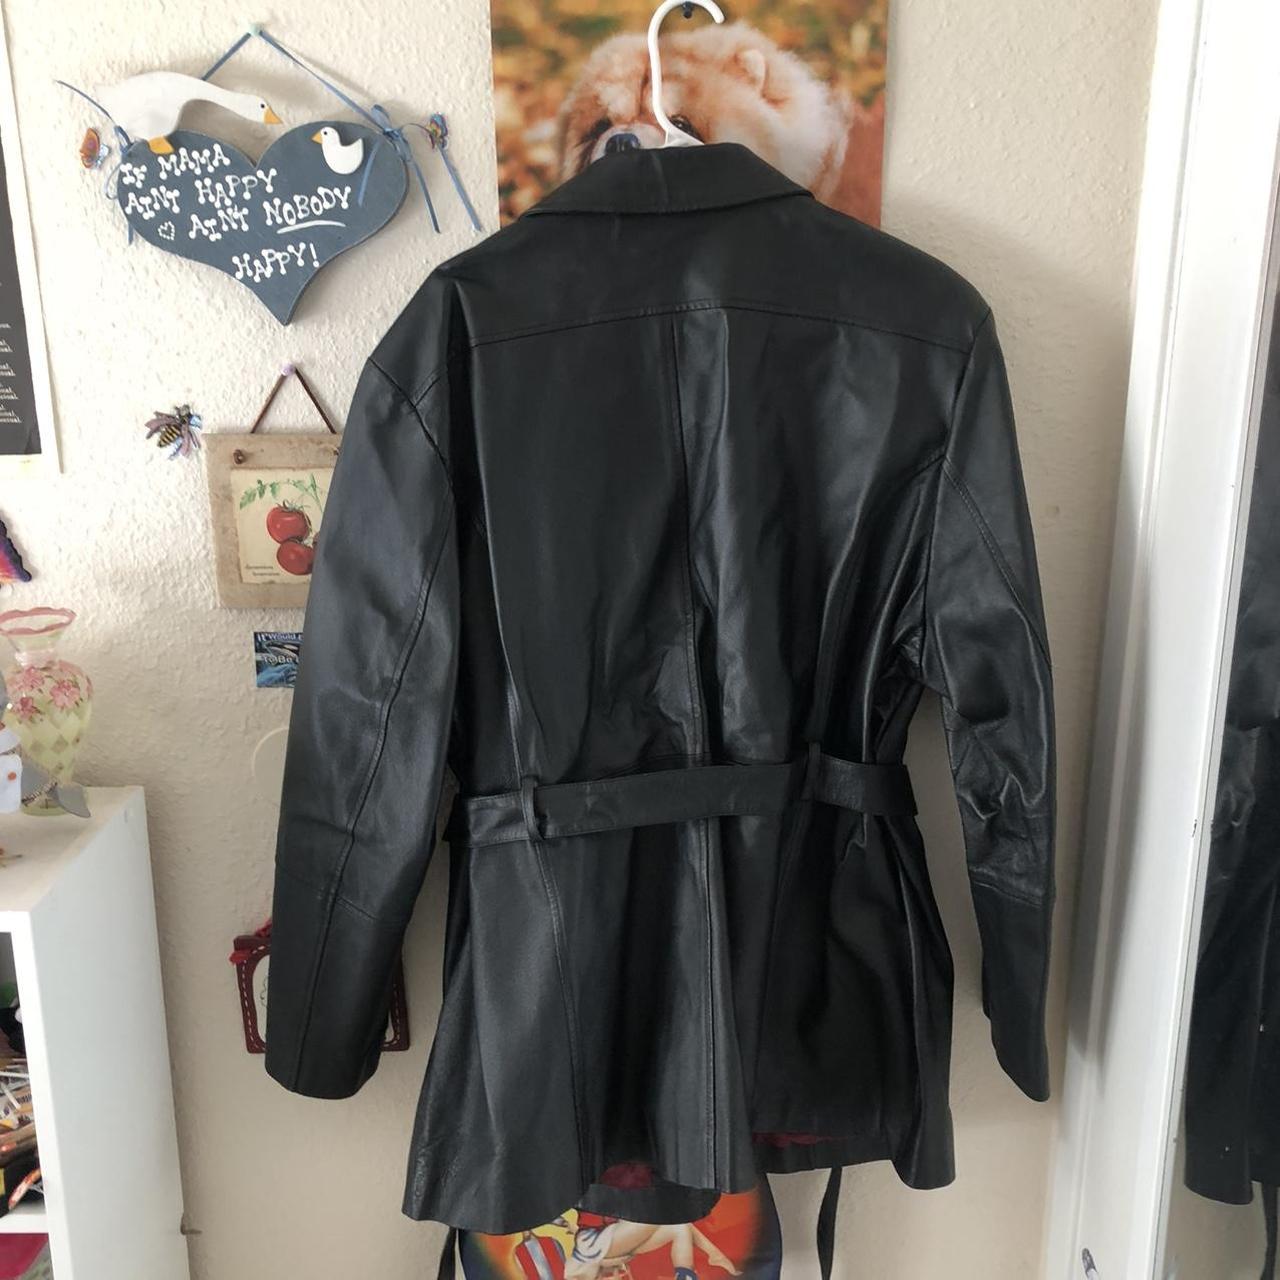 CROFT AND BARROW LEATHER JACKET this is in perfect... - Depop